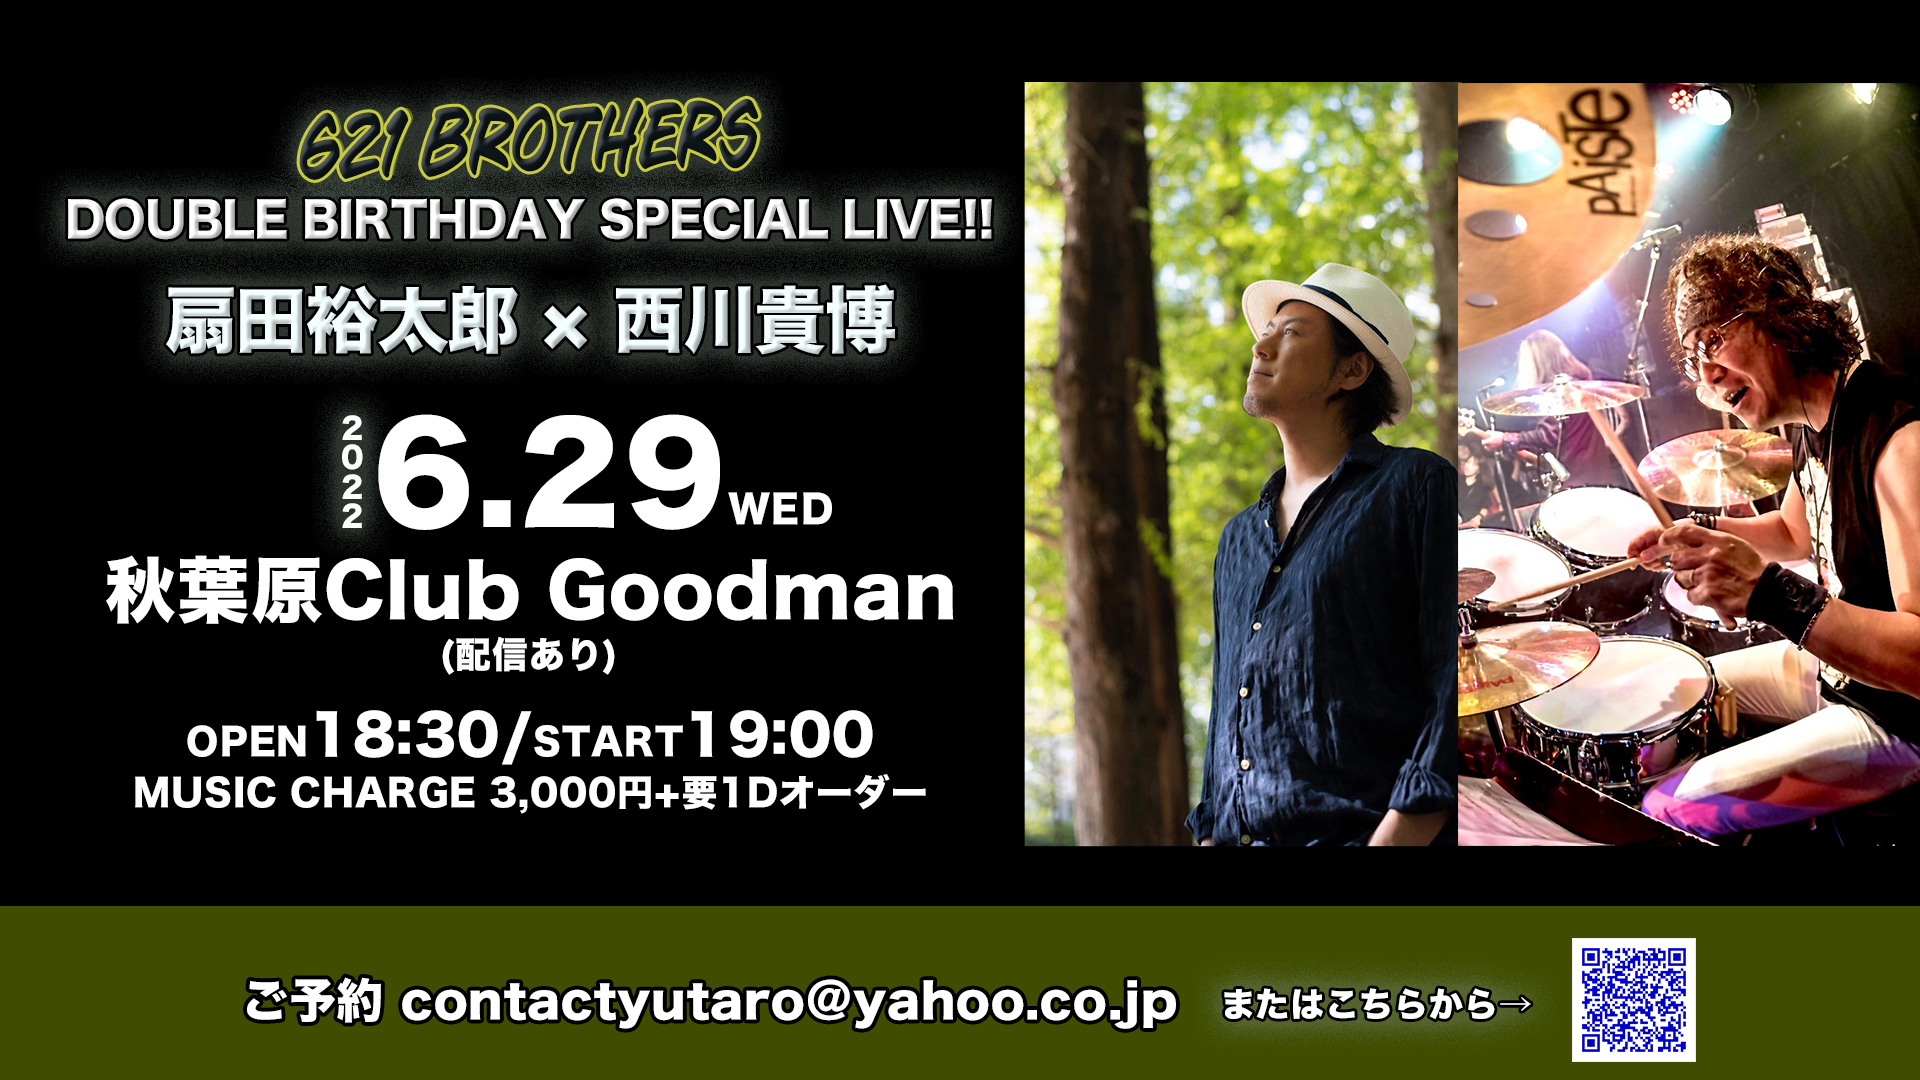 621 BROTHERS DOUBLE BIRTHDAY SPECIAL LIVE!!